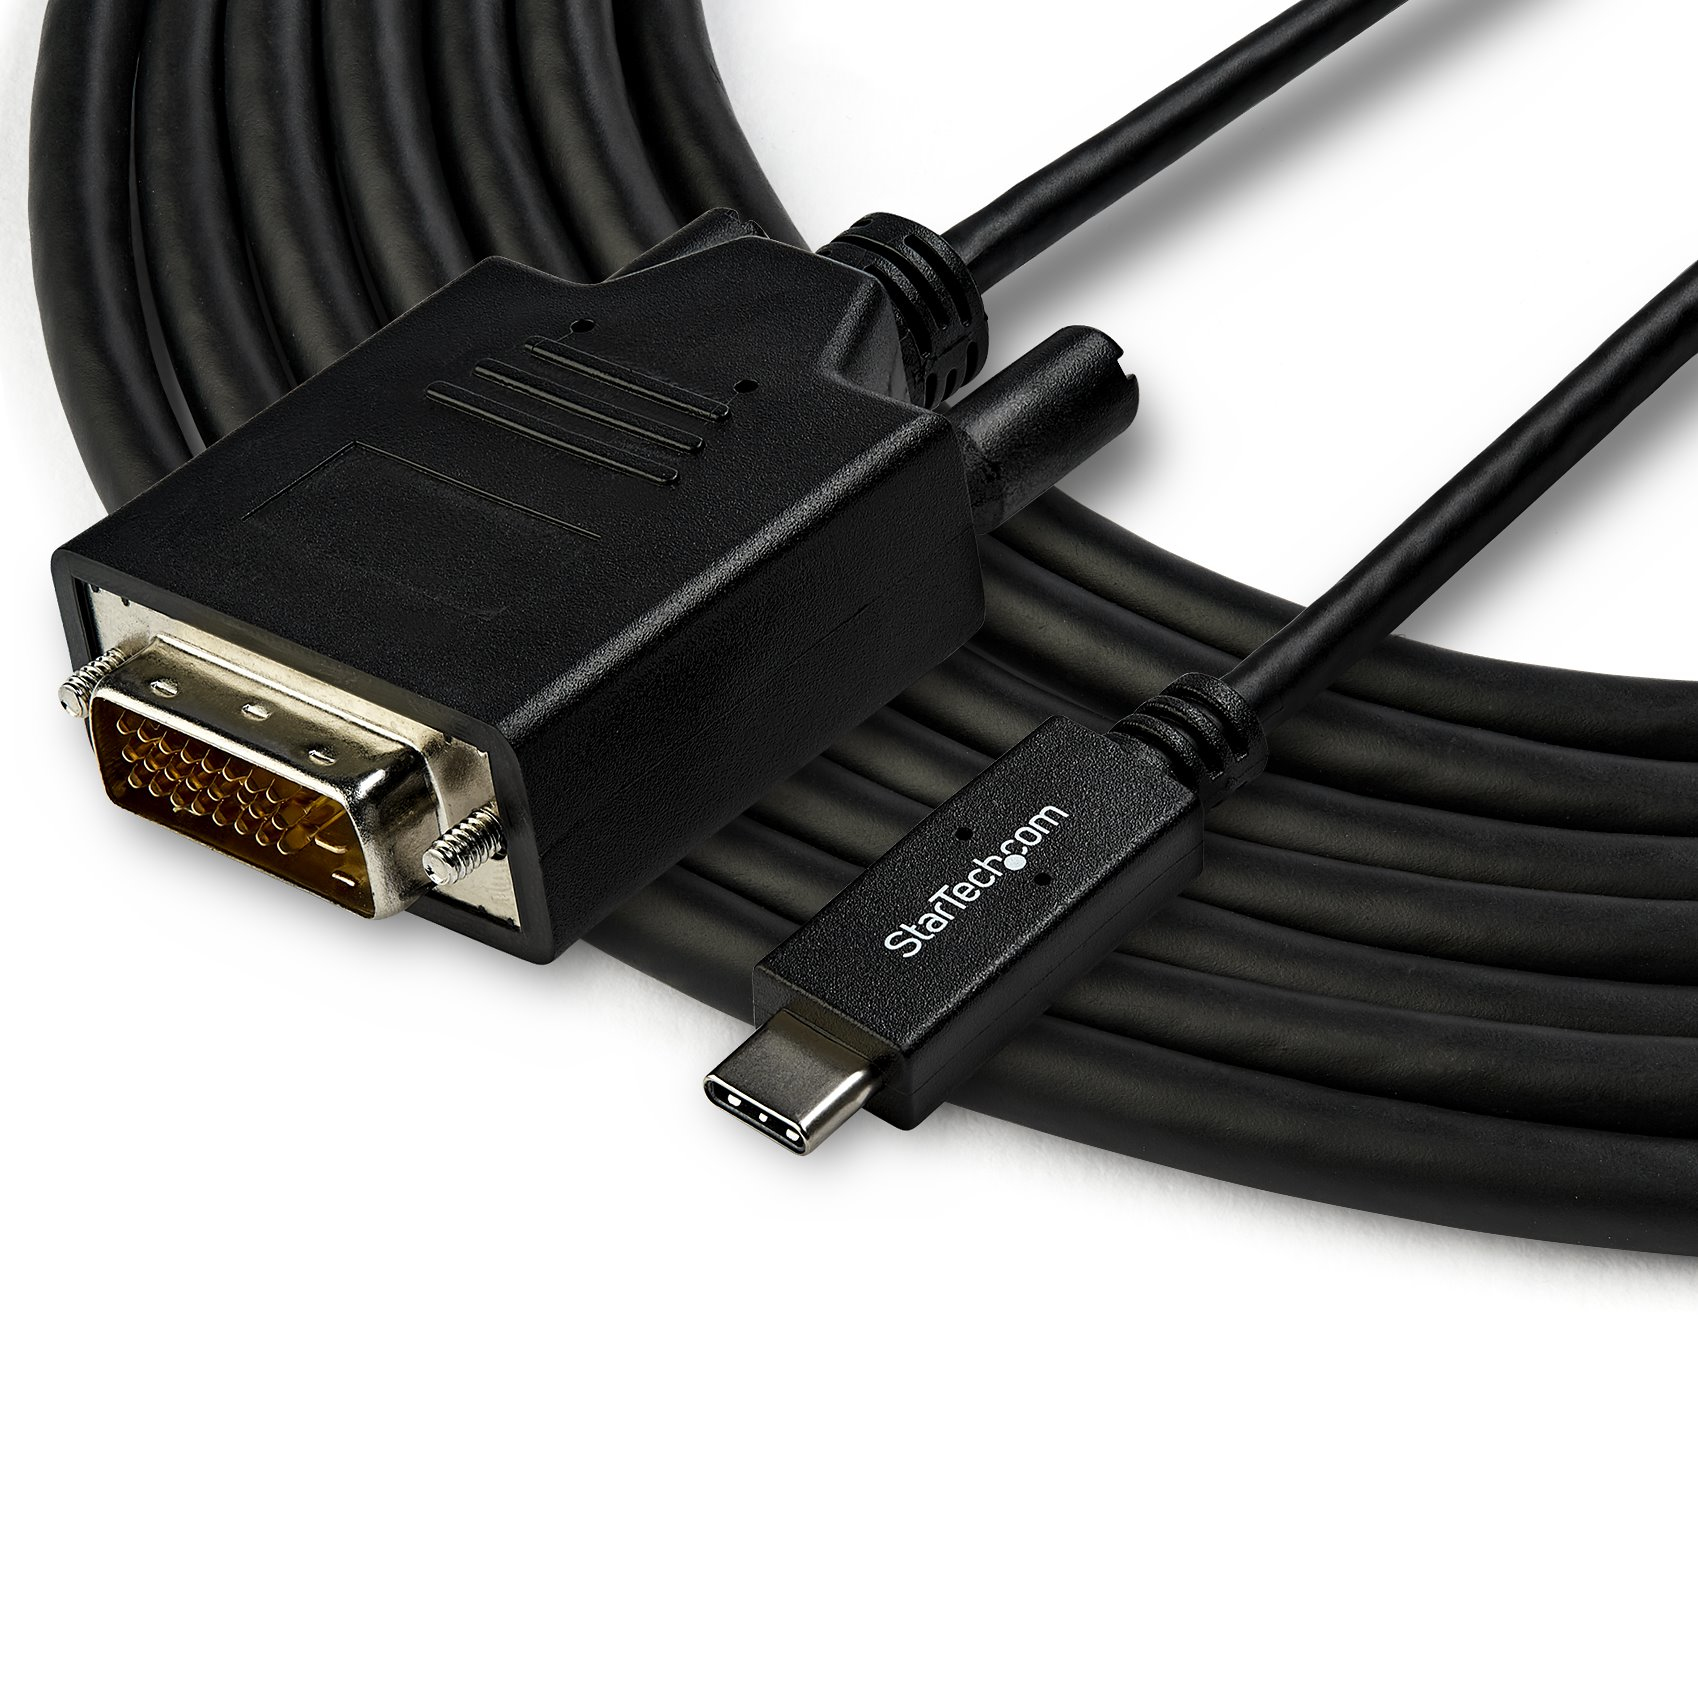 DVI to HDMI Cable Converter Wire 10Ft 3M for HDTV PC Monitor Computer  Laptop